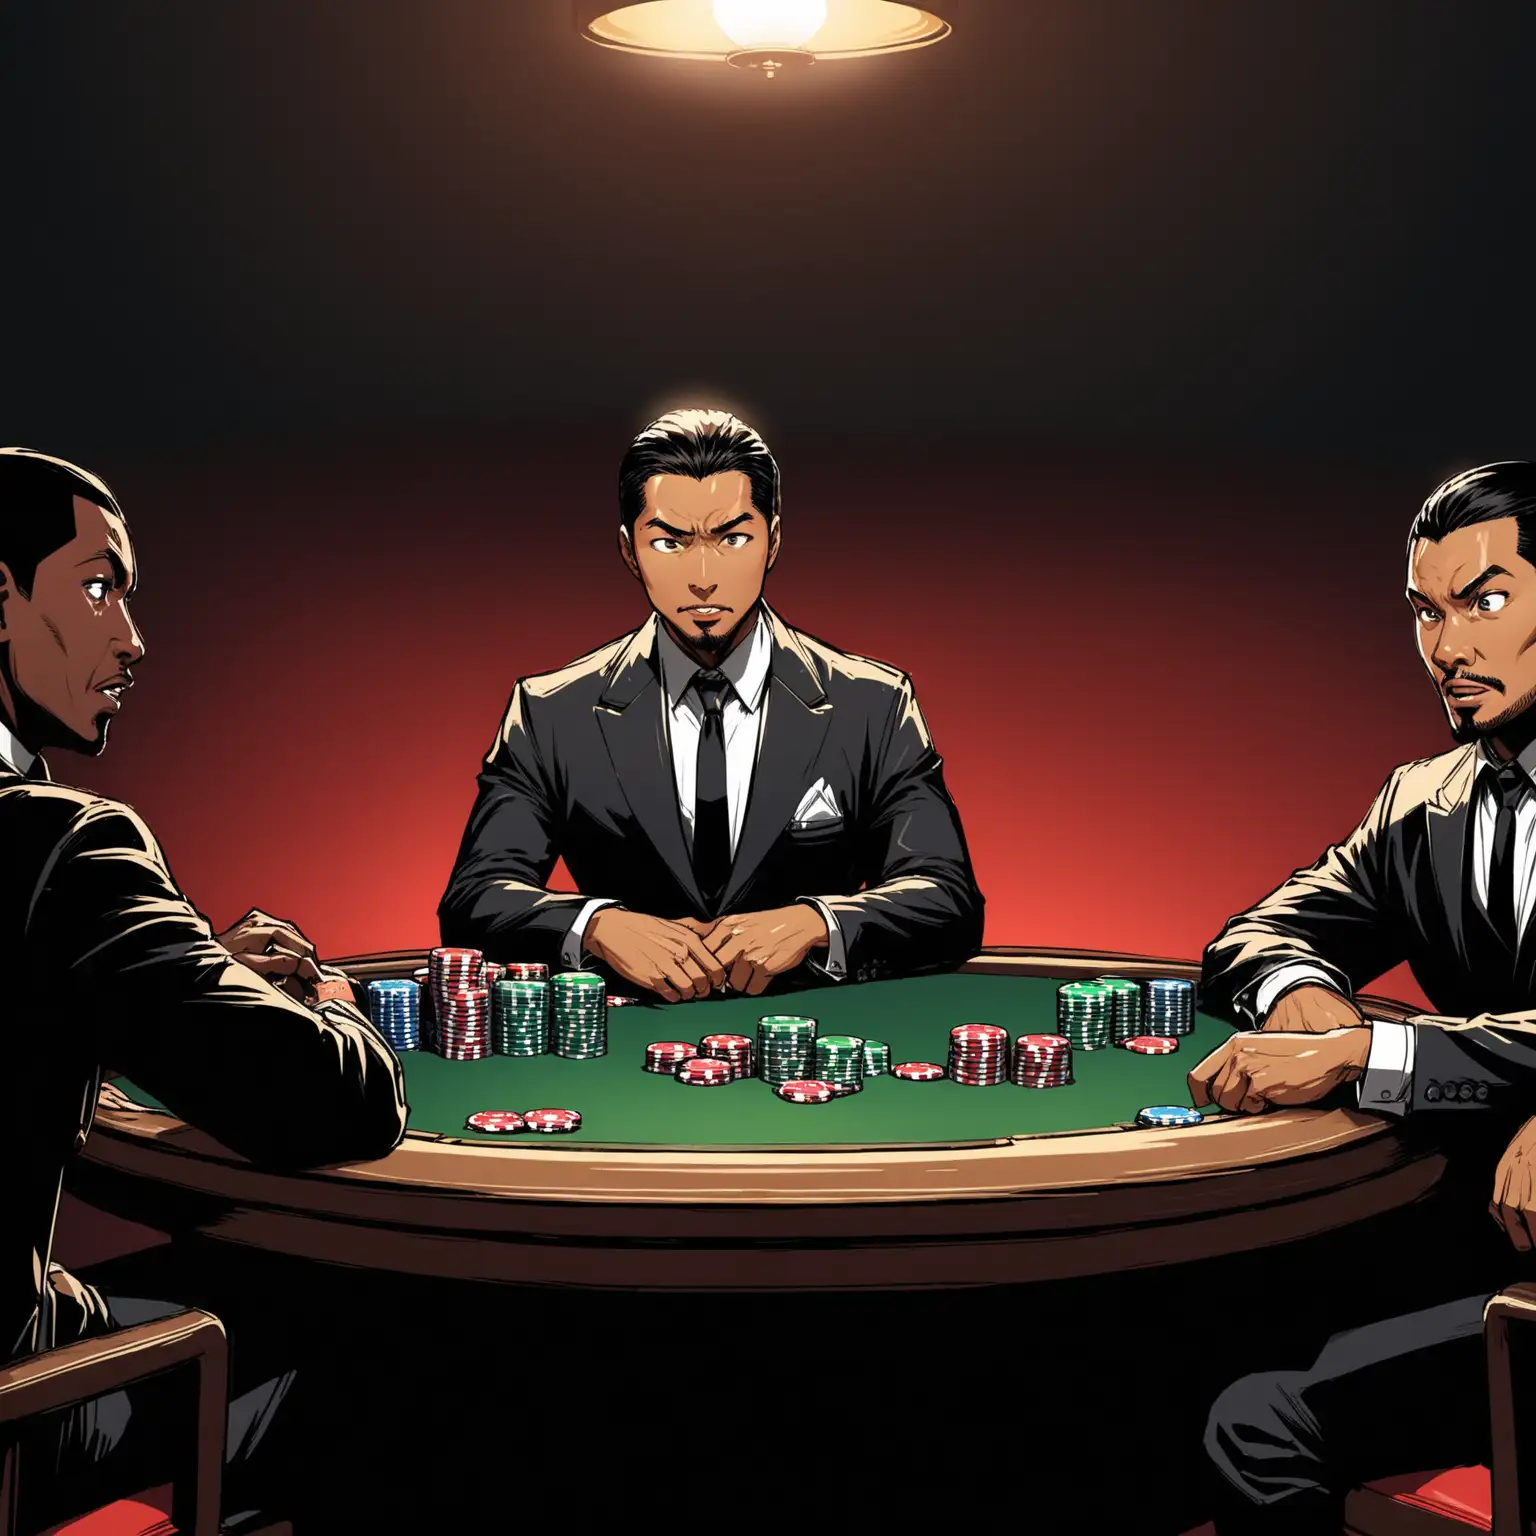 A dim room with red lights. It was once a speakeasy, now its a modernized lounge where the players play. We are looking Over the shoulder of an african amercan man dressed in a black, suit at 1 asian man very handsome is dressed in dark jeans and a black button up but very nervous  both sitting at the table, deep in a game of poker. Chips stacked. Stacks of cash, stashed around the table. The asian guy has a very cocky facial expression
